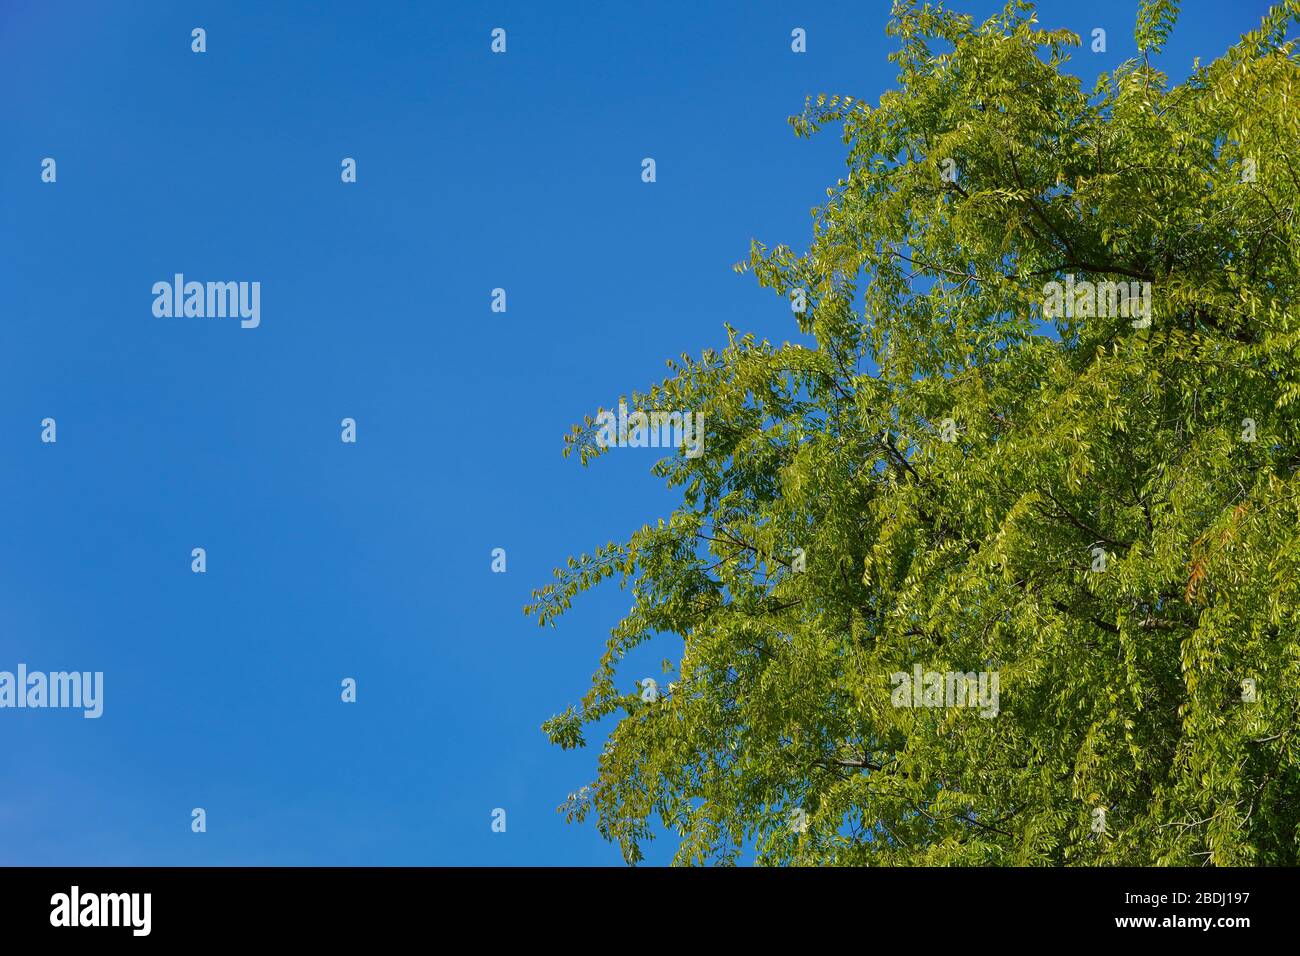 Looking up at the crown of a bright green tree with new leaves against a deep blue clear sky on a sunny day; half the frame has copy space. Stock Photo